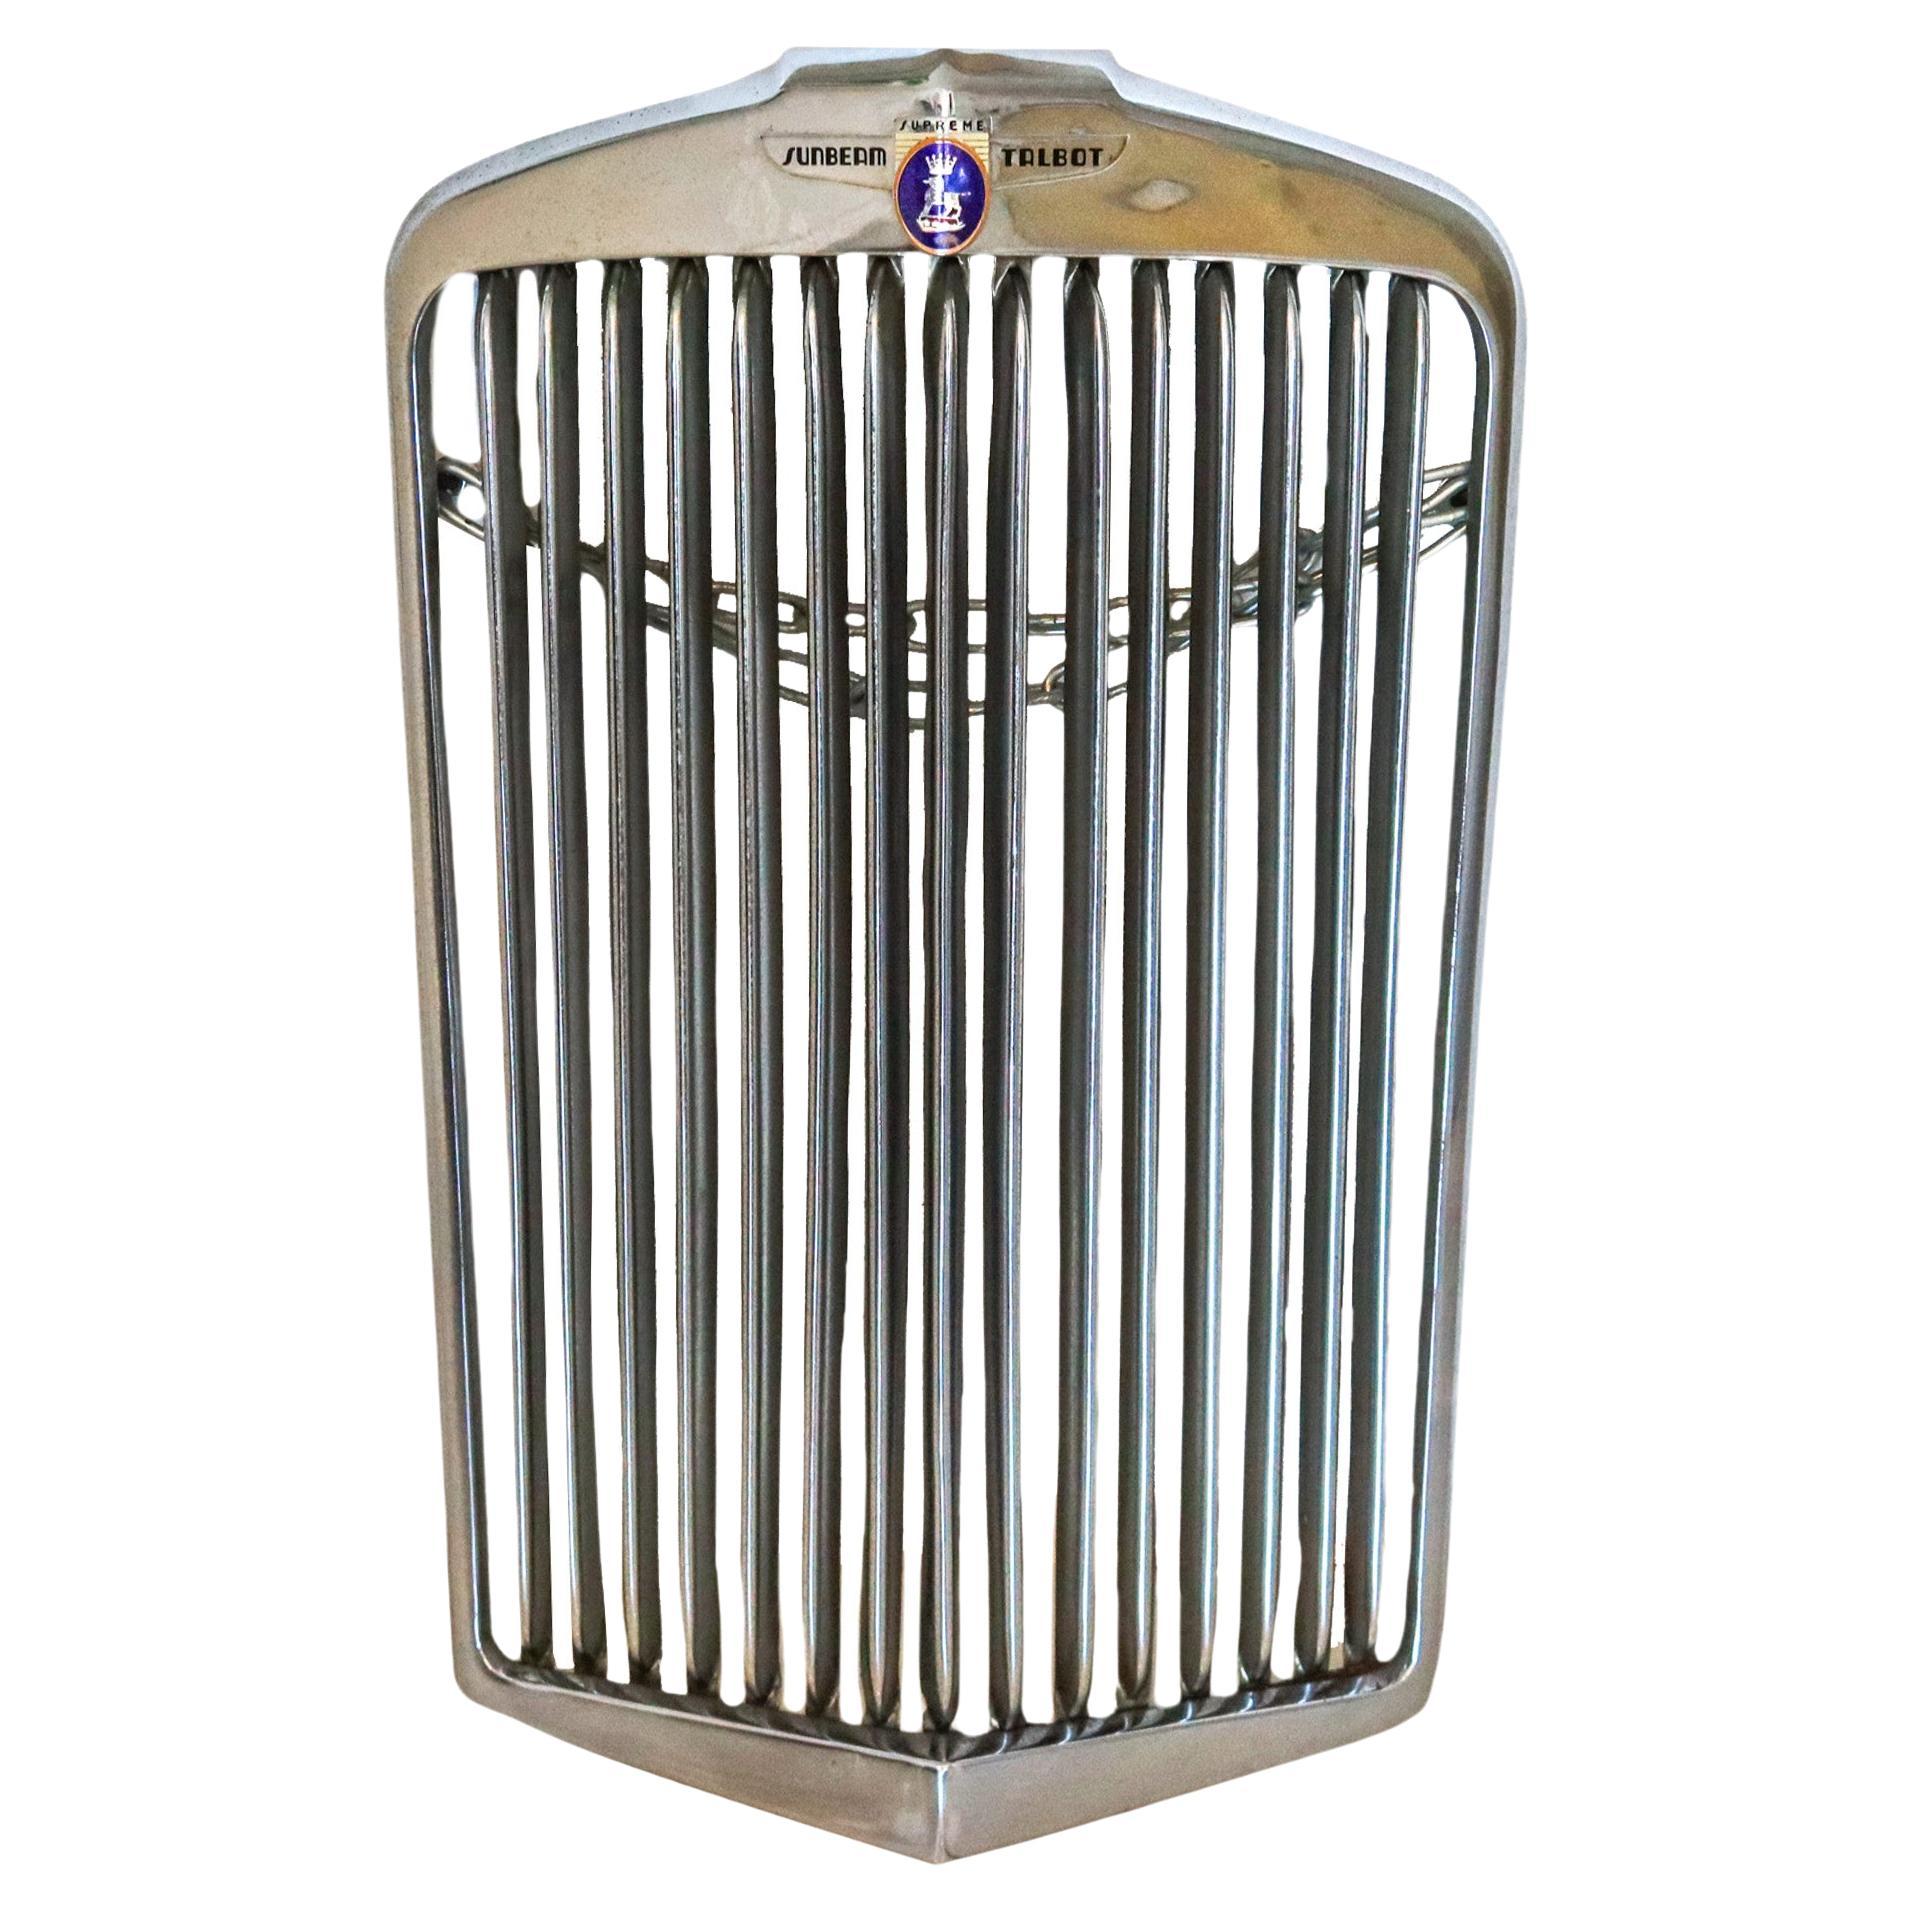 Sunbeam Supreme Talbot Rare 1947 Radiator Cover Front In Steel And Enamel